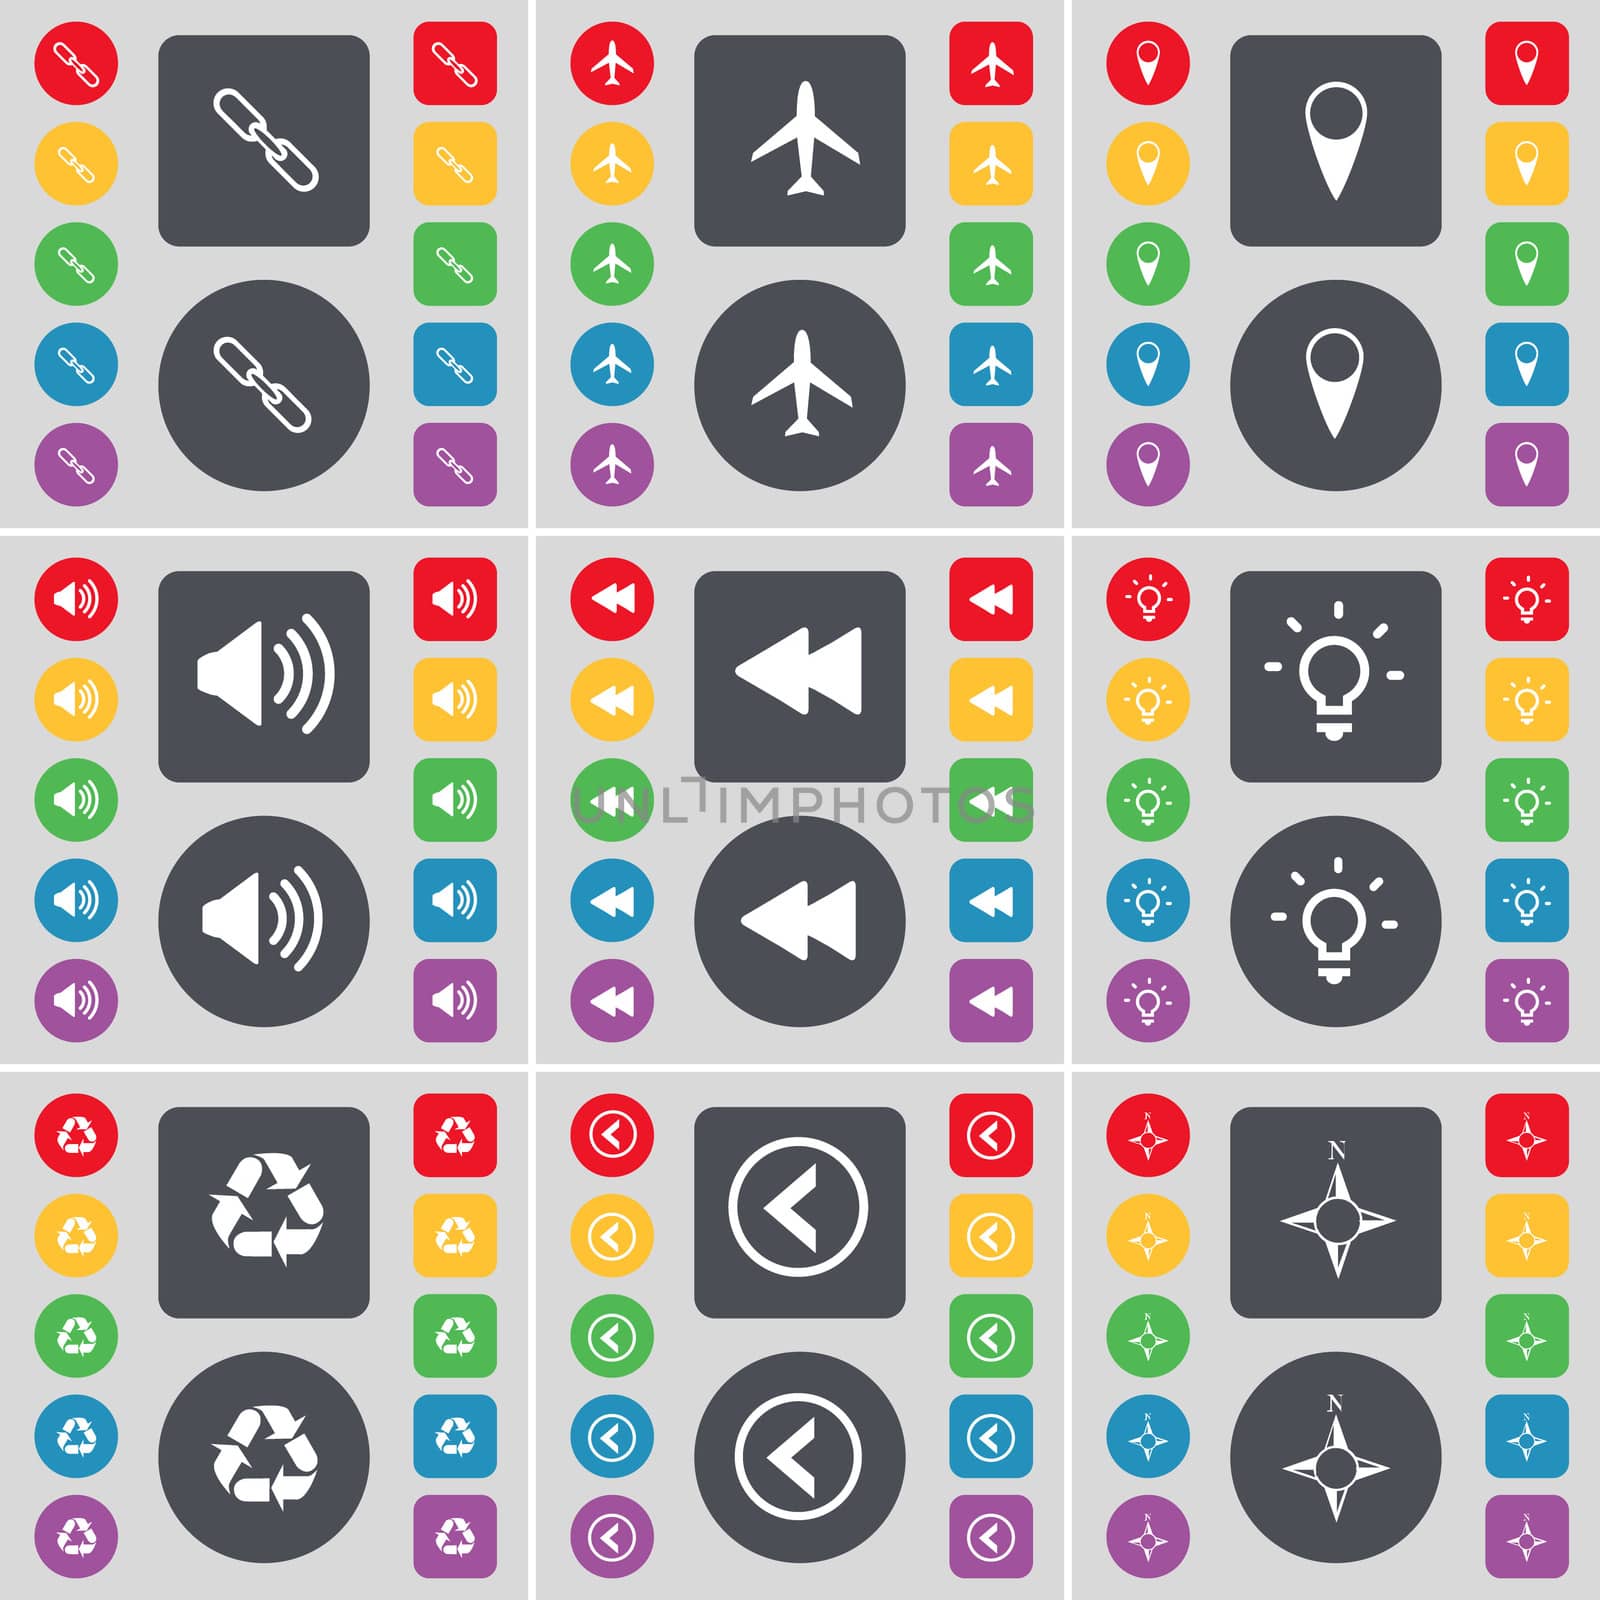 Link, Airplane, Checkpoint, Sound, Rewind, Light bulb, Recycling, Arrow left, Compass icon symbol. A large set of flat, colored buttons for your design. illustration